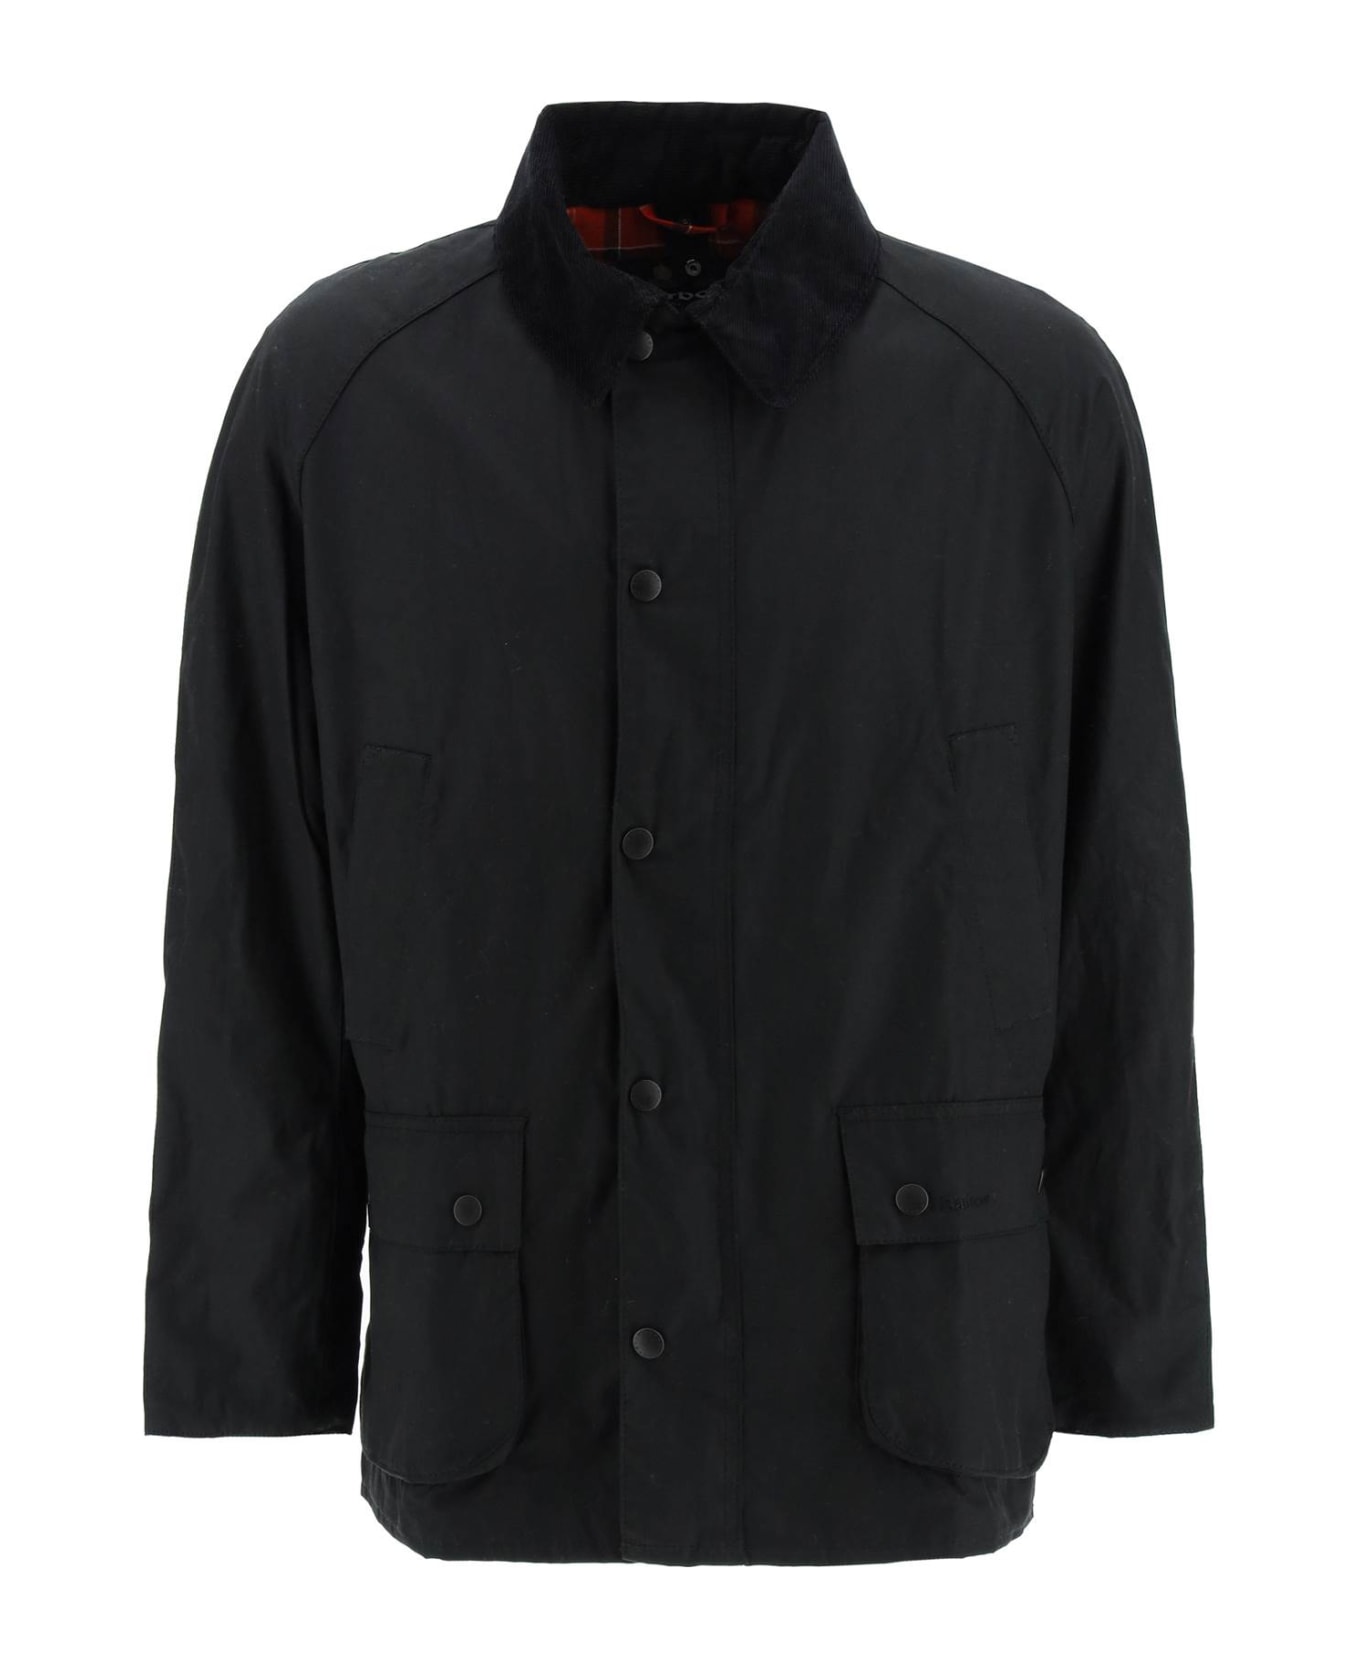 Barbour Ashby Waxed Jacket - BLACK CLASSIC (Black) ジャケット